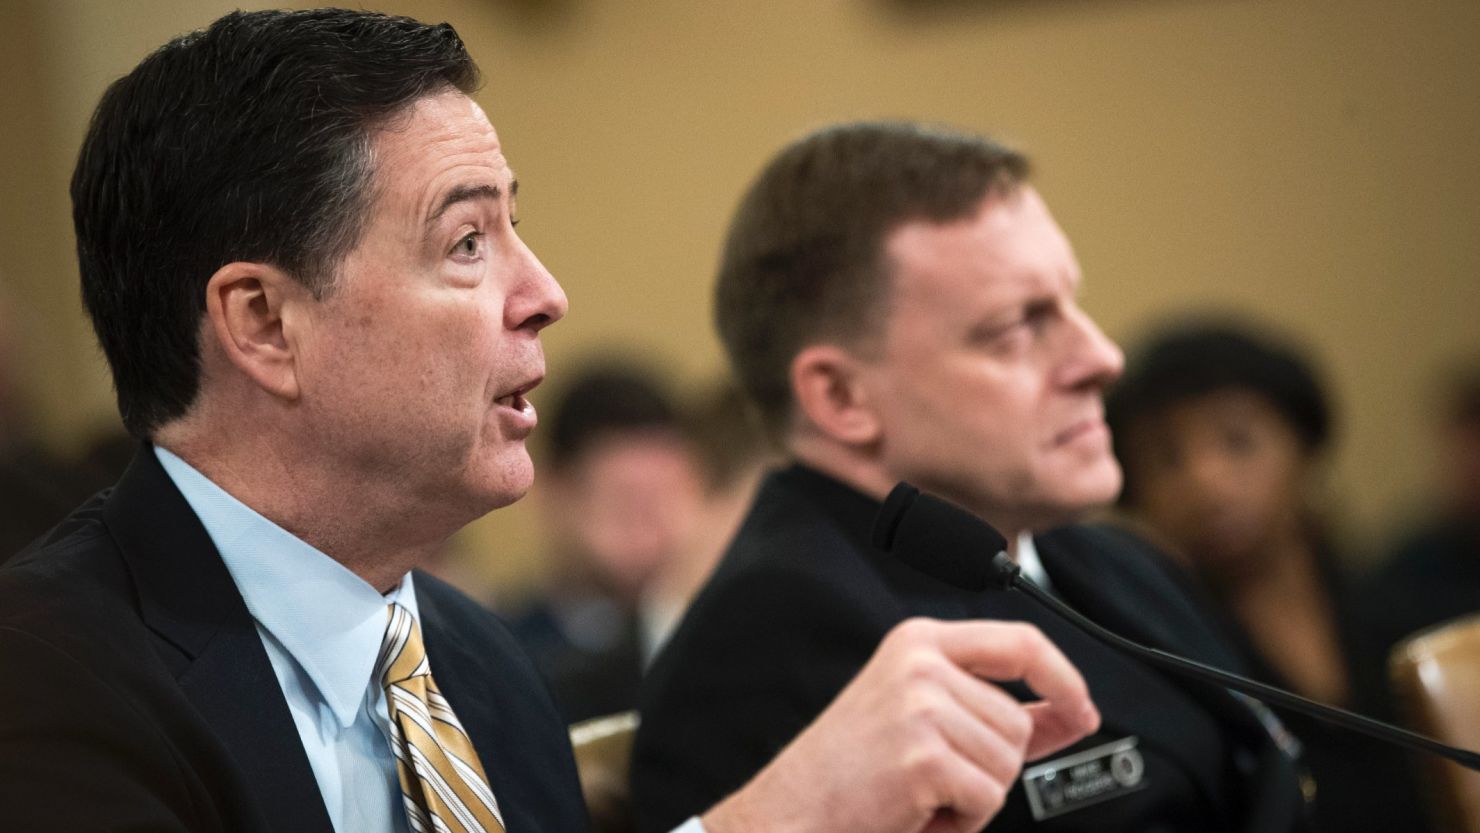 FBI Director James Comey, Director, and Michael Rogers, Director of the National Security Agency, testify before a House committee about Intelligence concerning Russian meddling in the 2016 US election.